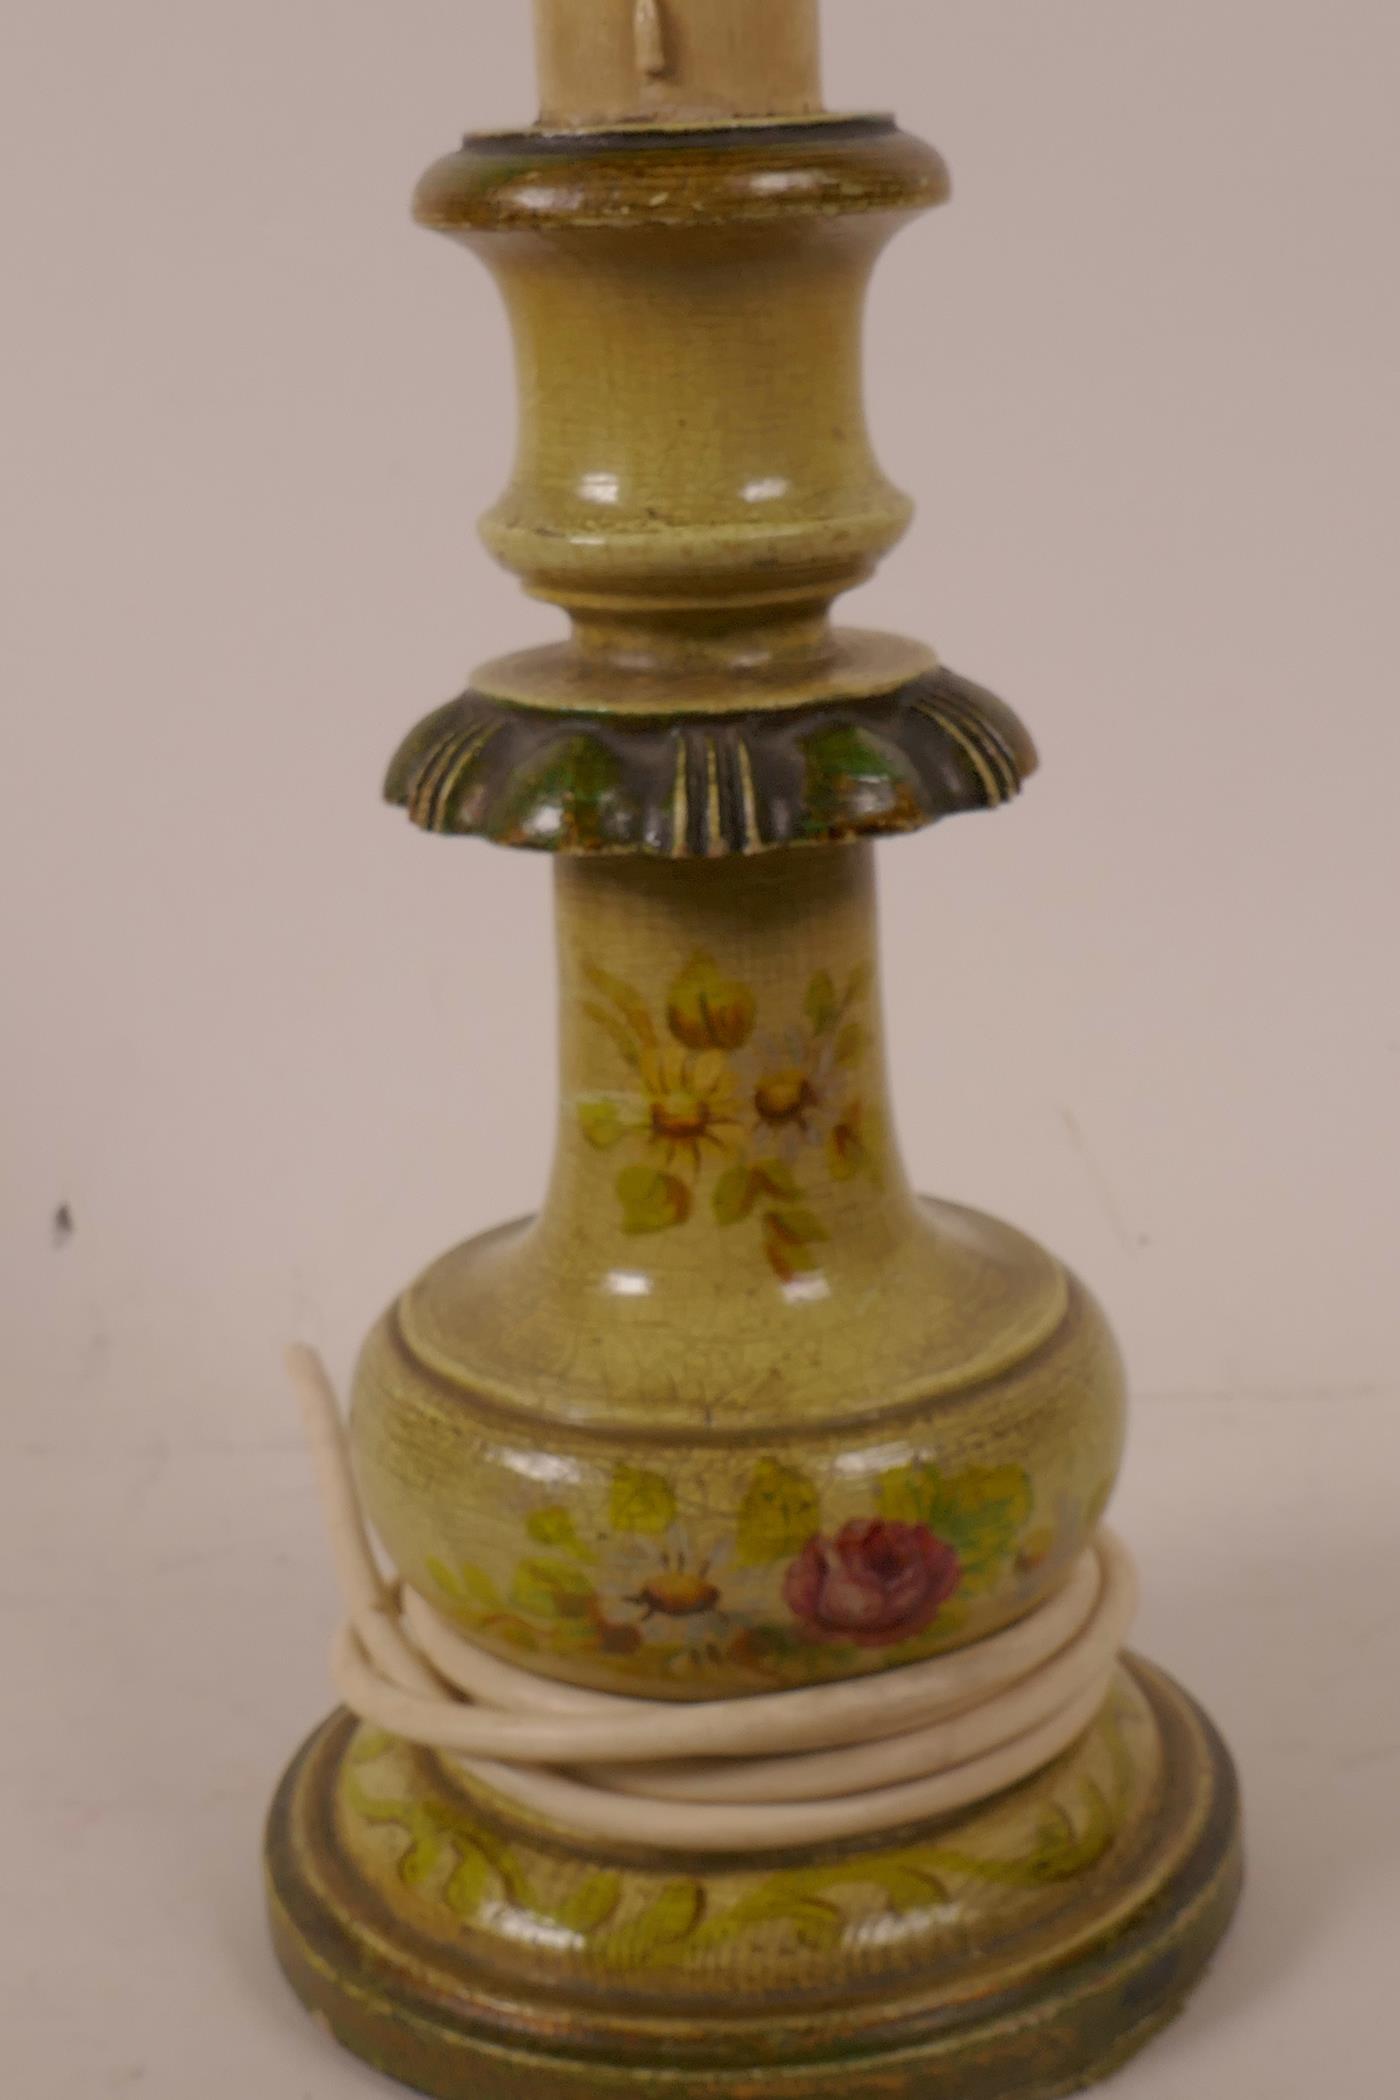 An Italianate painted turned wood table lamp base, 12" high - Image 2 of 3